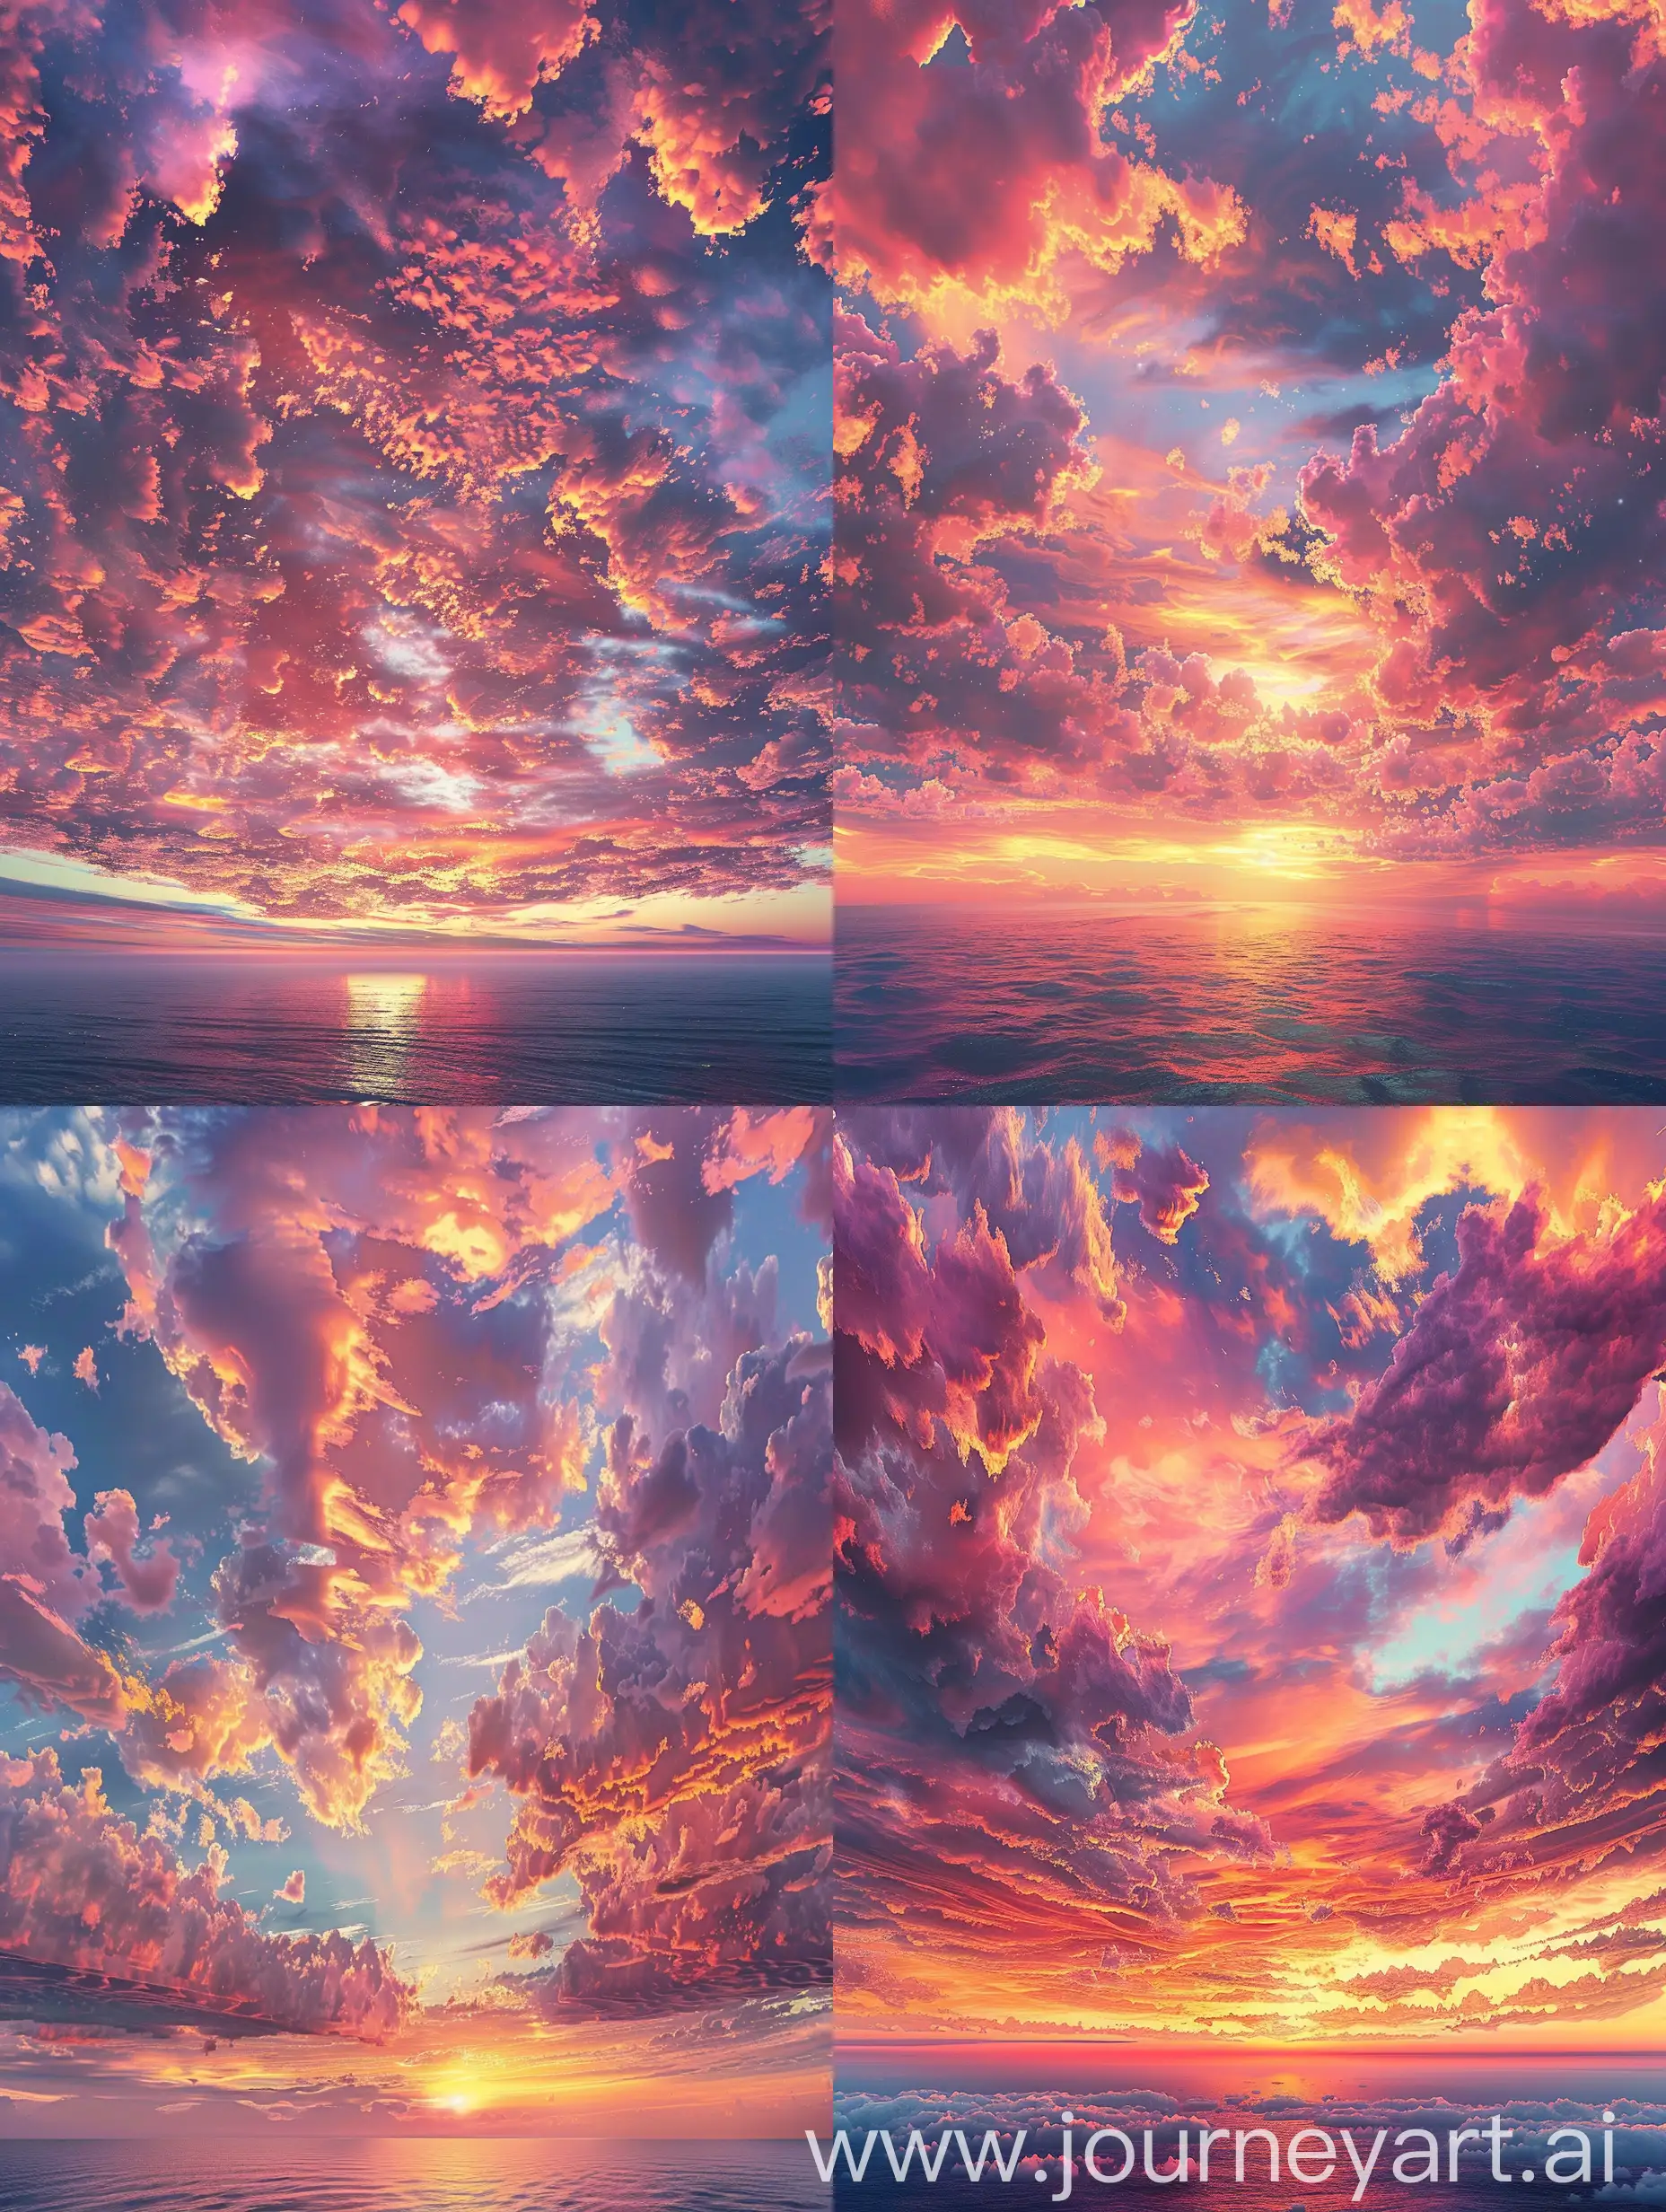 A breathtaking skyscape featuring a vibrant sunset with clouds in the stratosphere. The scene is awash with rich shades of pink, orange, and purple, reflecting the sun's last light. The clouds are intricately textured, adding depth and movement to the composition. Below, a serene and vast ocean horizon stretches out, its surface calm and reflecting the sky's fiery hues. The overall atmosphere is one of awe and tranquil beauty, with the stratospheric clouds catching the colors in a display of nature's grandeur.","size":"1024x1024"}